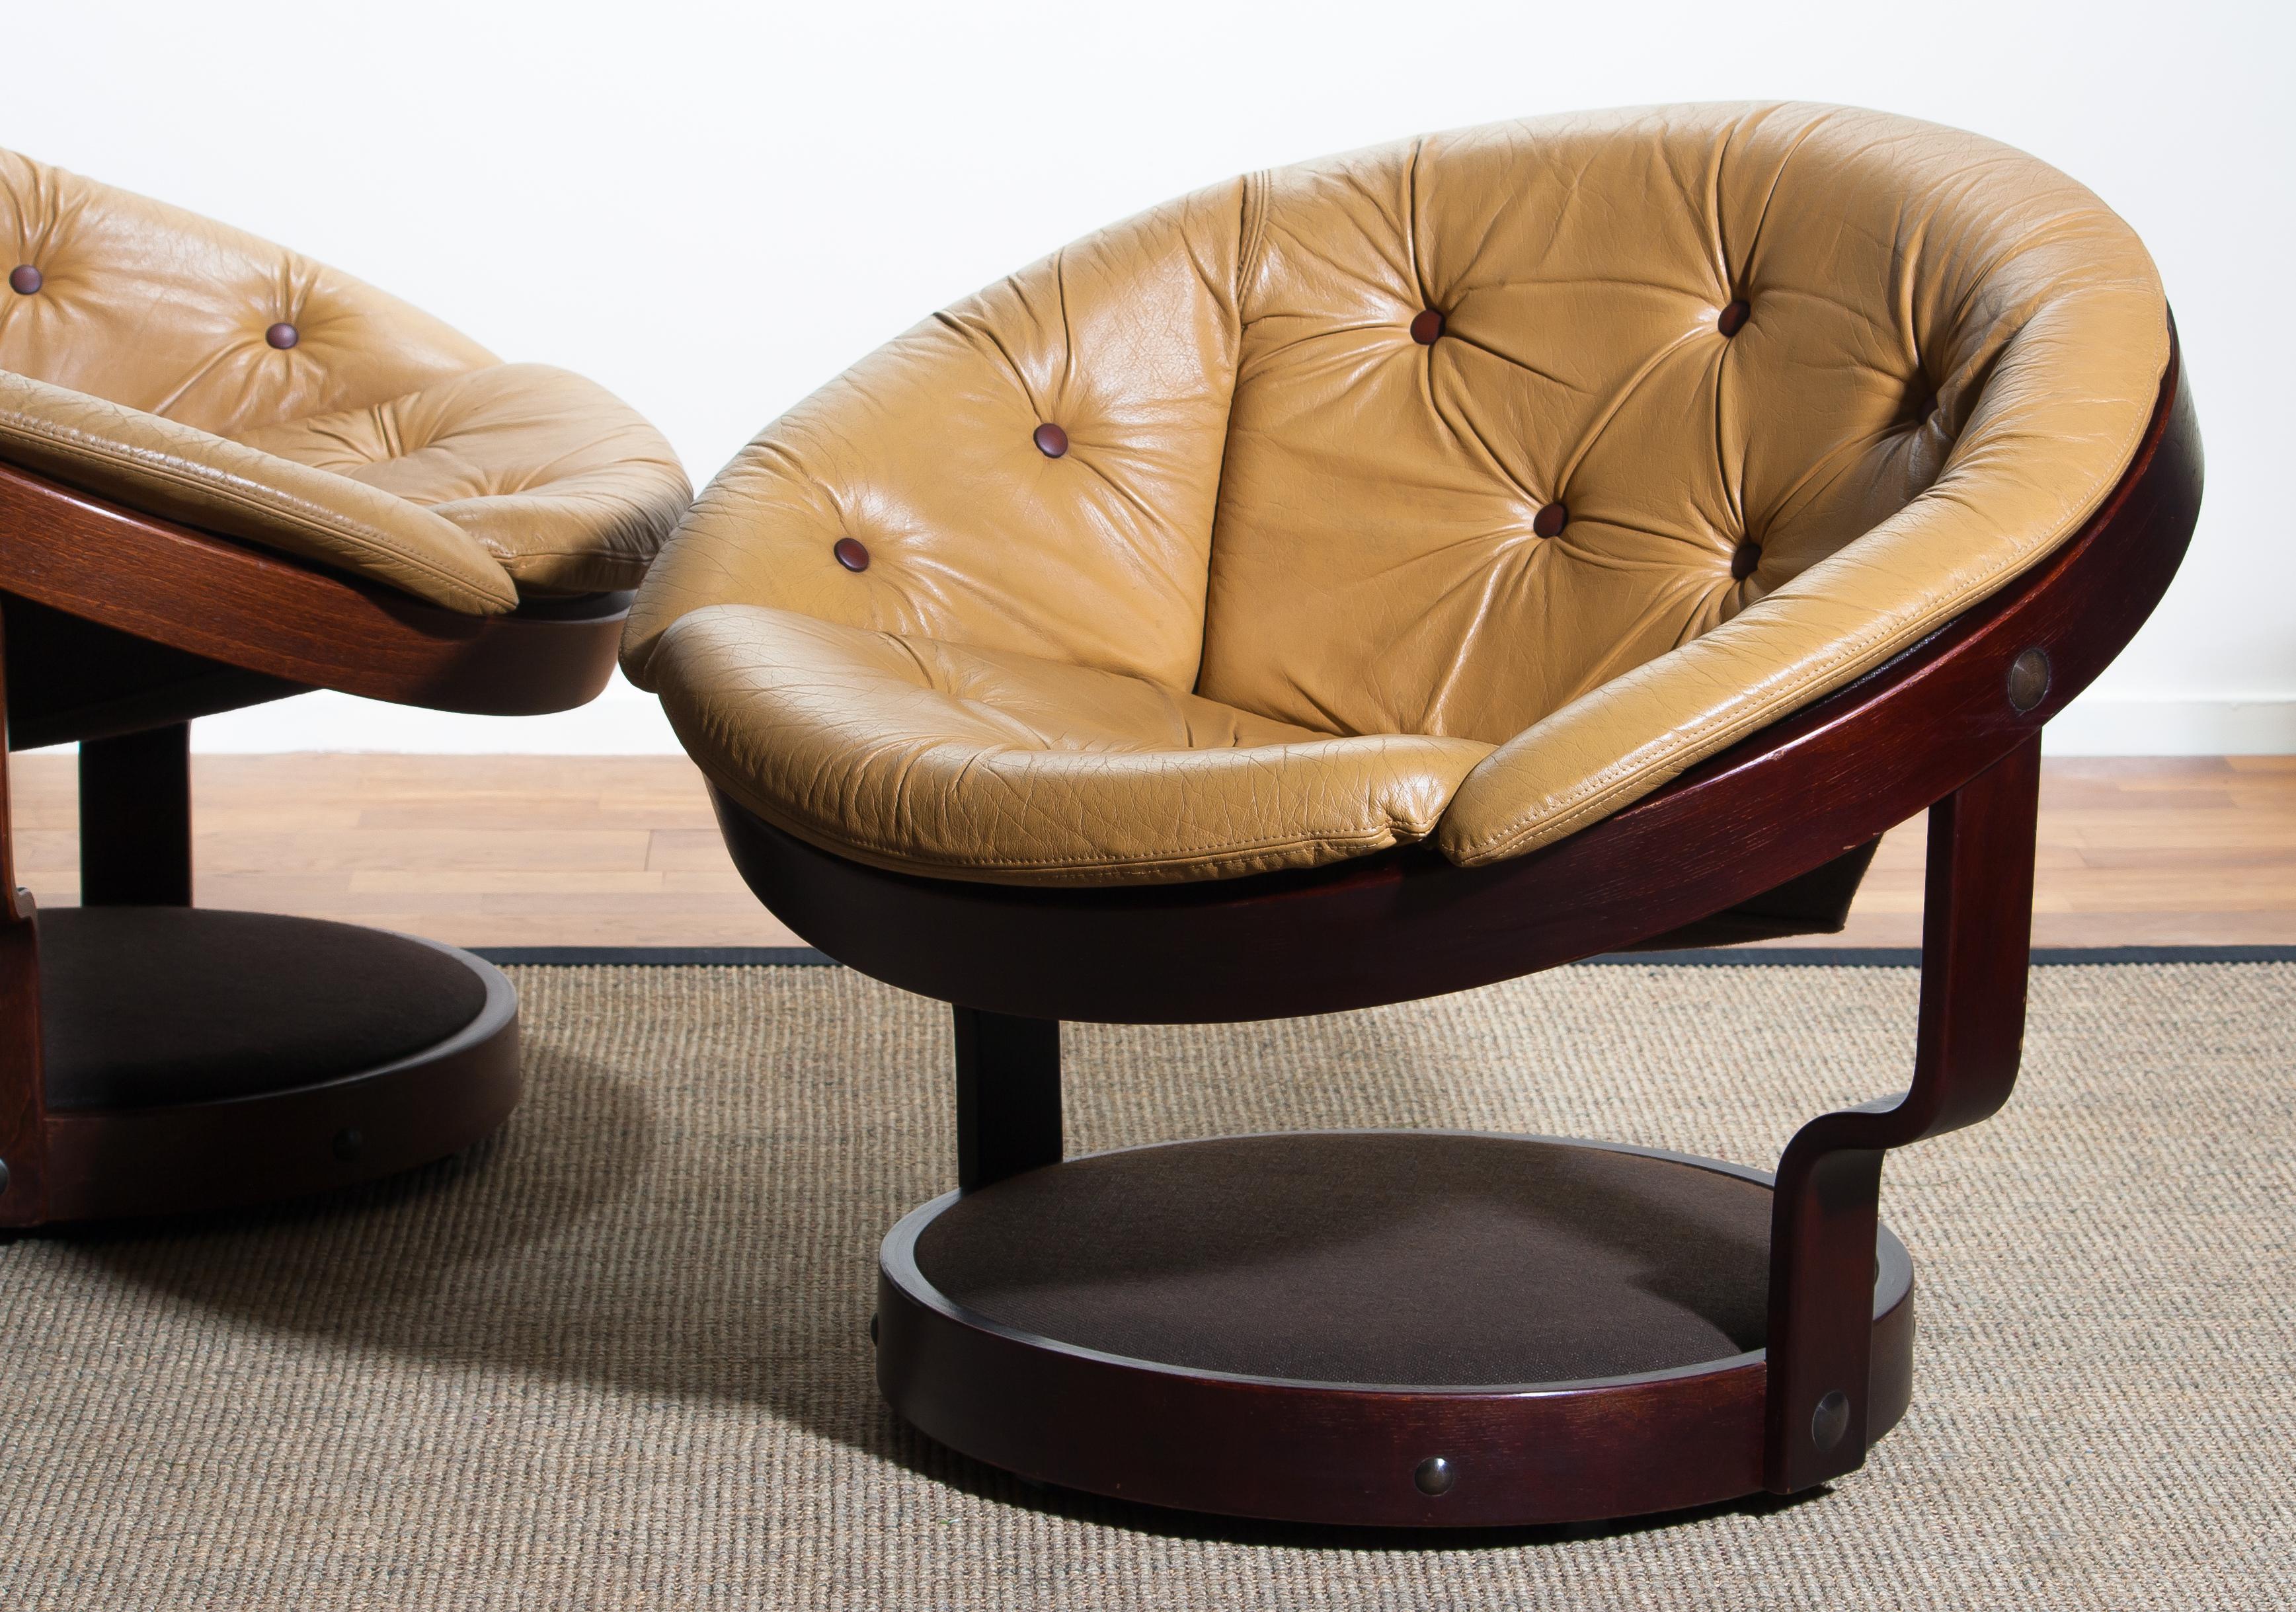 Two beautiful circle shaped easy / lounge chairs by Oddmund Vad for VAD Trevarefabrikk as from Norway. Designed in the 1970s. The chairs are in stabile and good condition.
The frame of one chair is in oak color and one in mahogany.